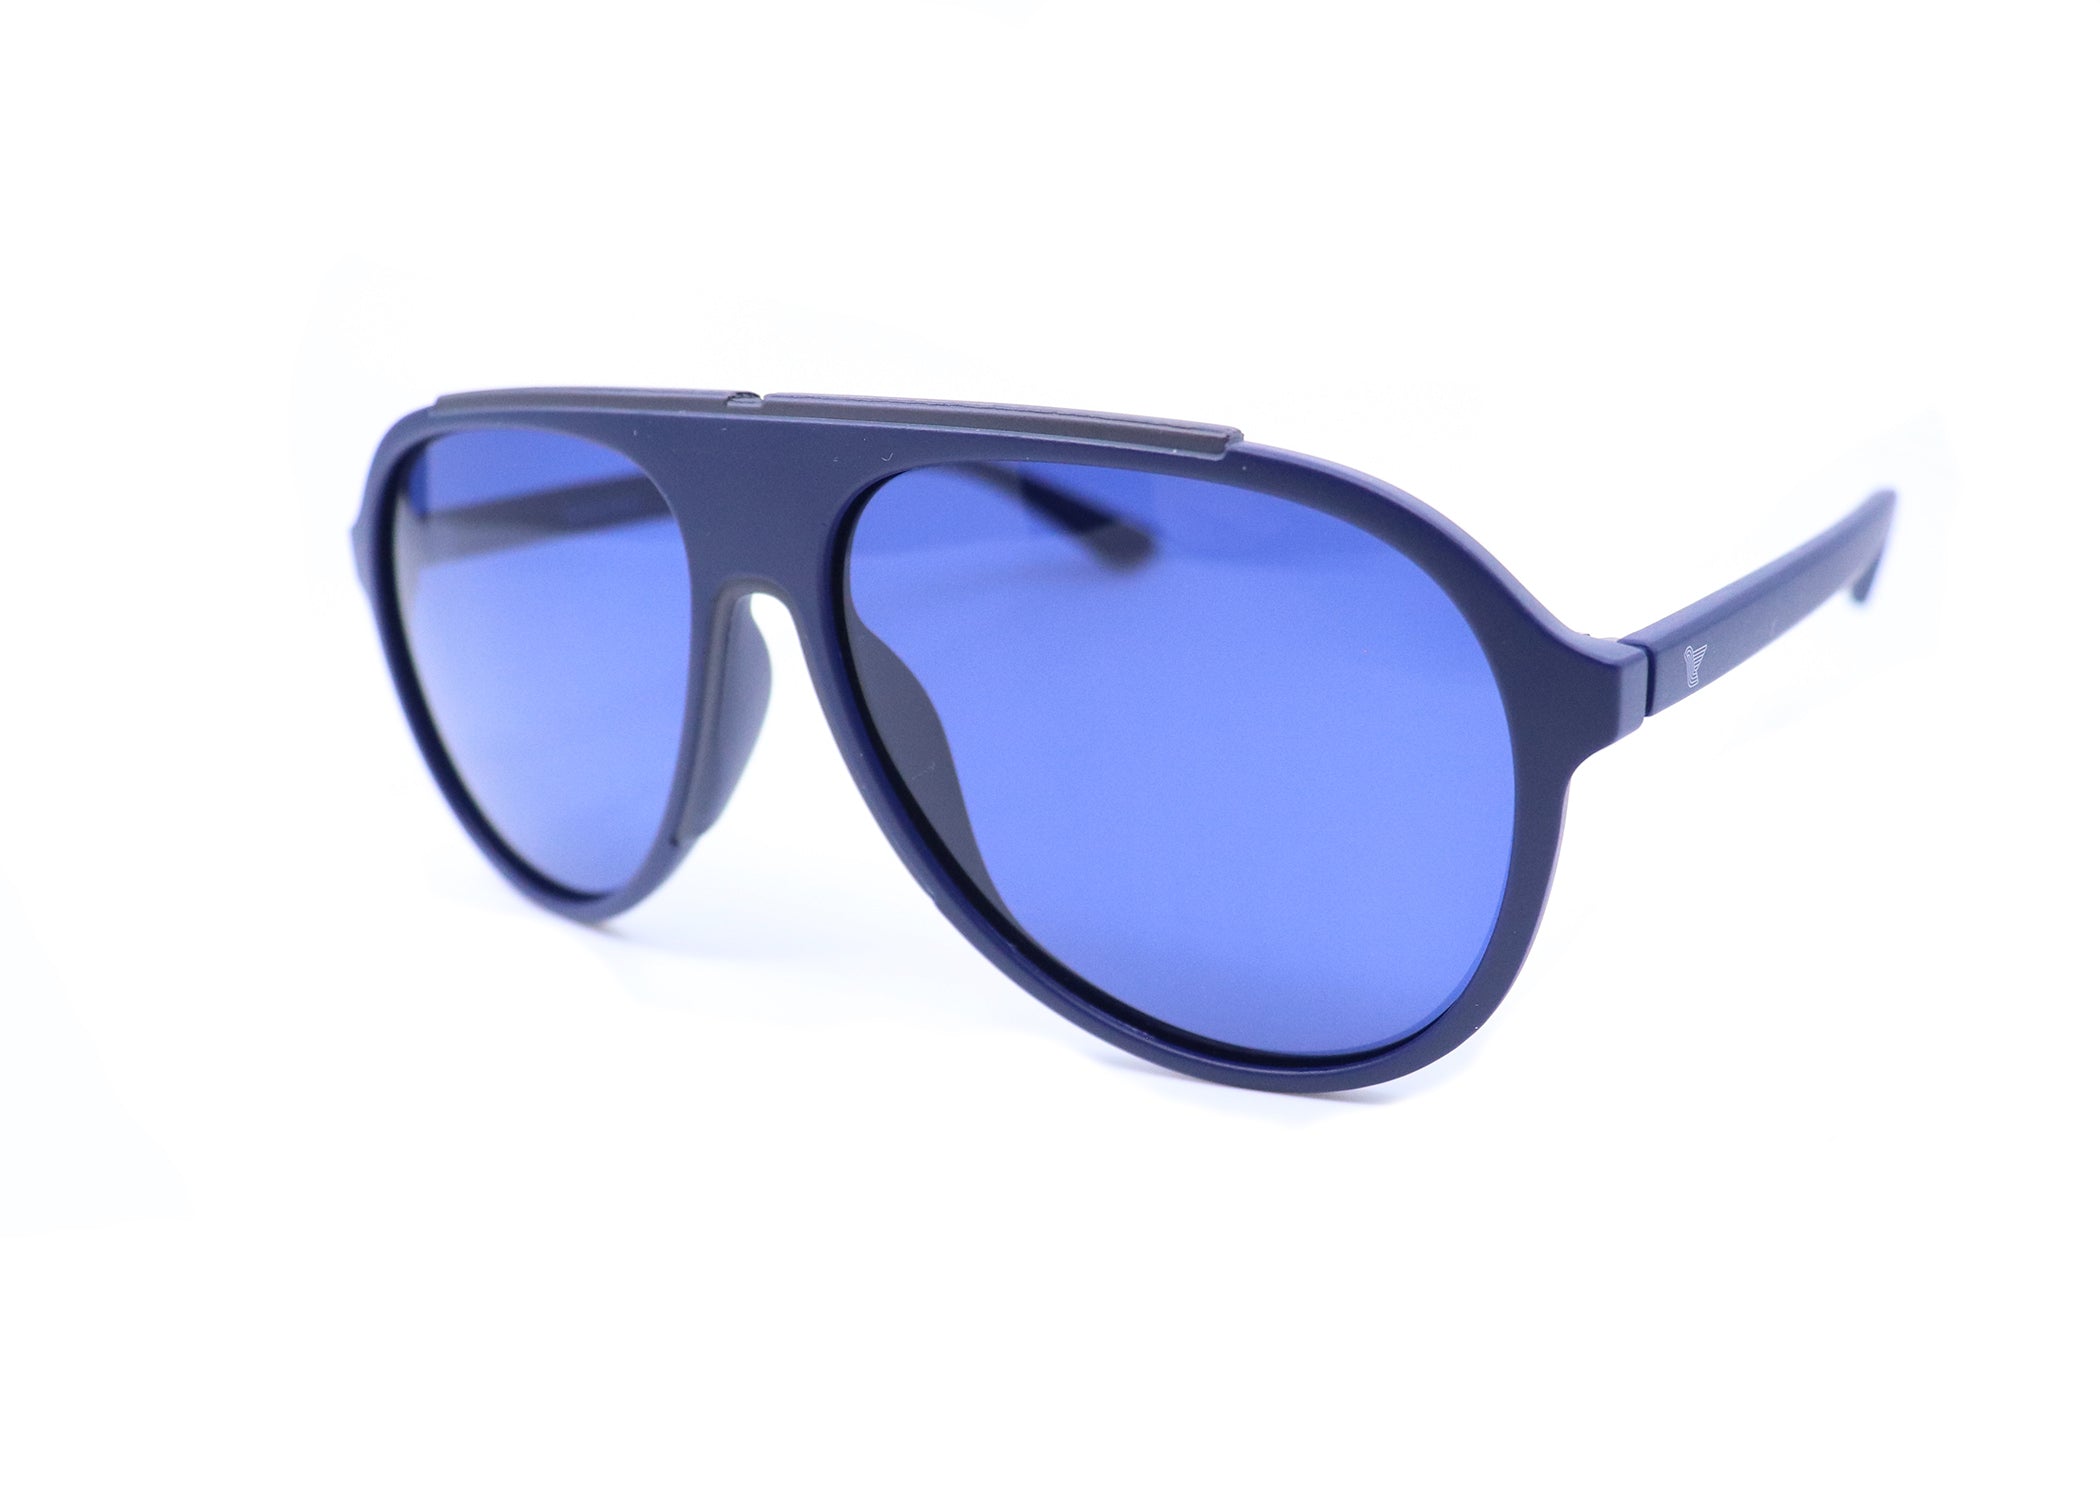 The Blue Icons Sport Sunglasses